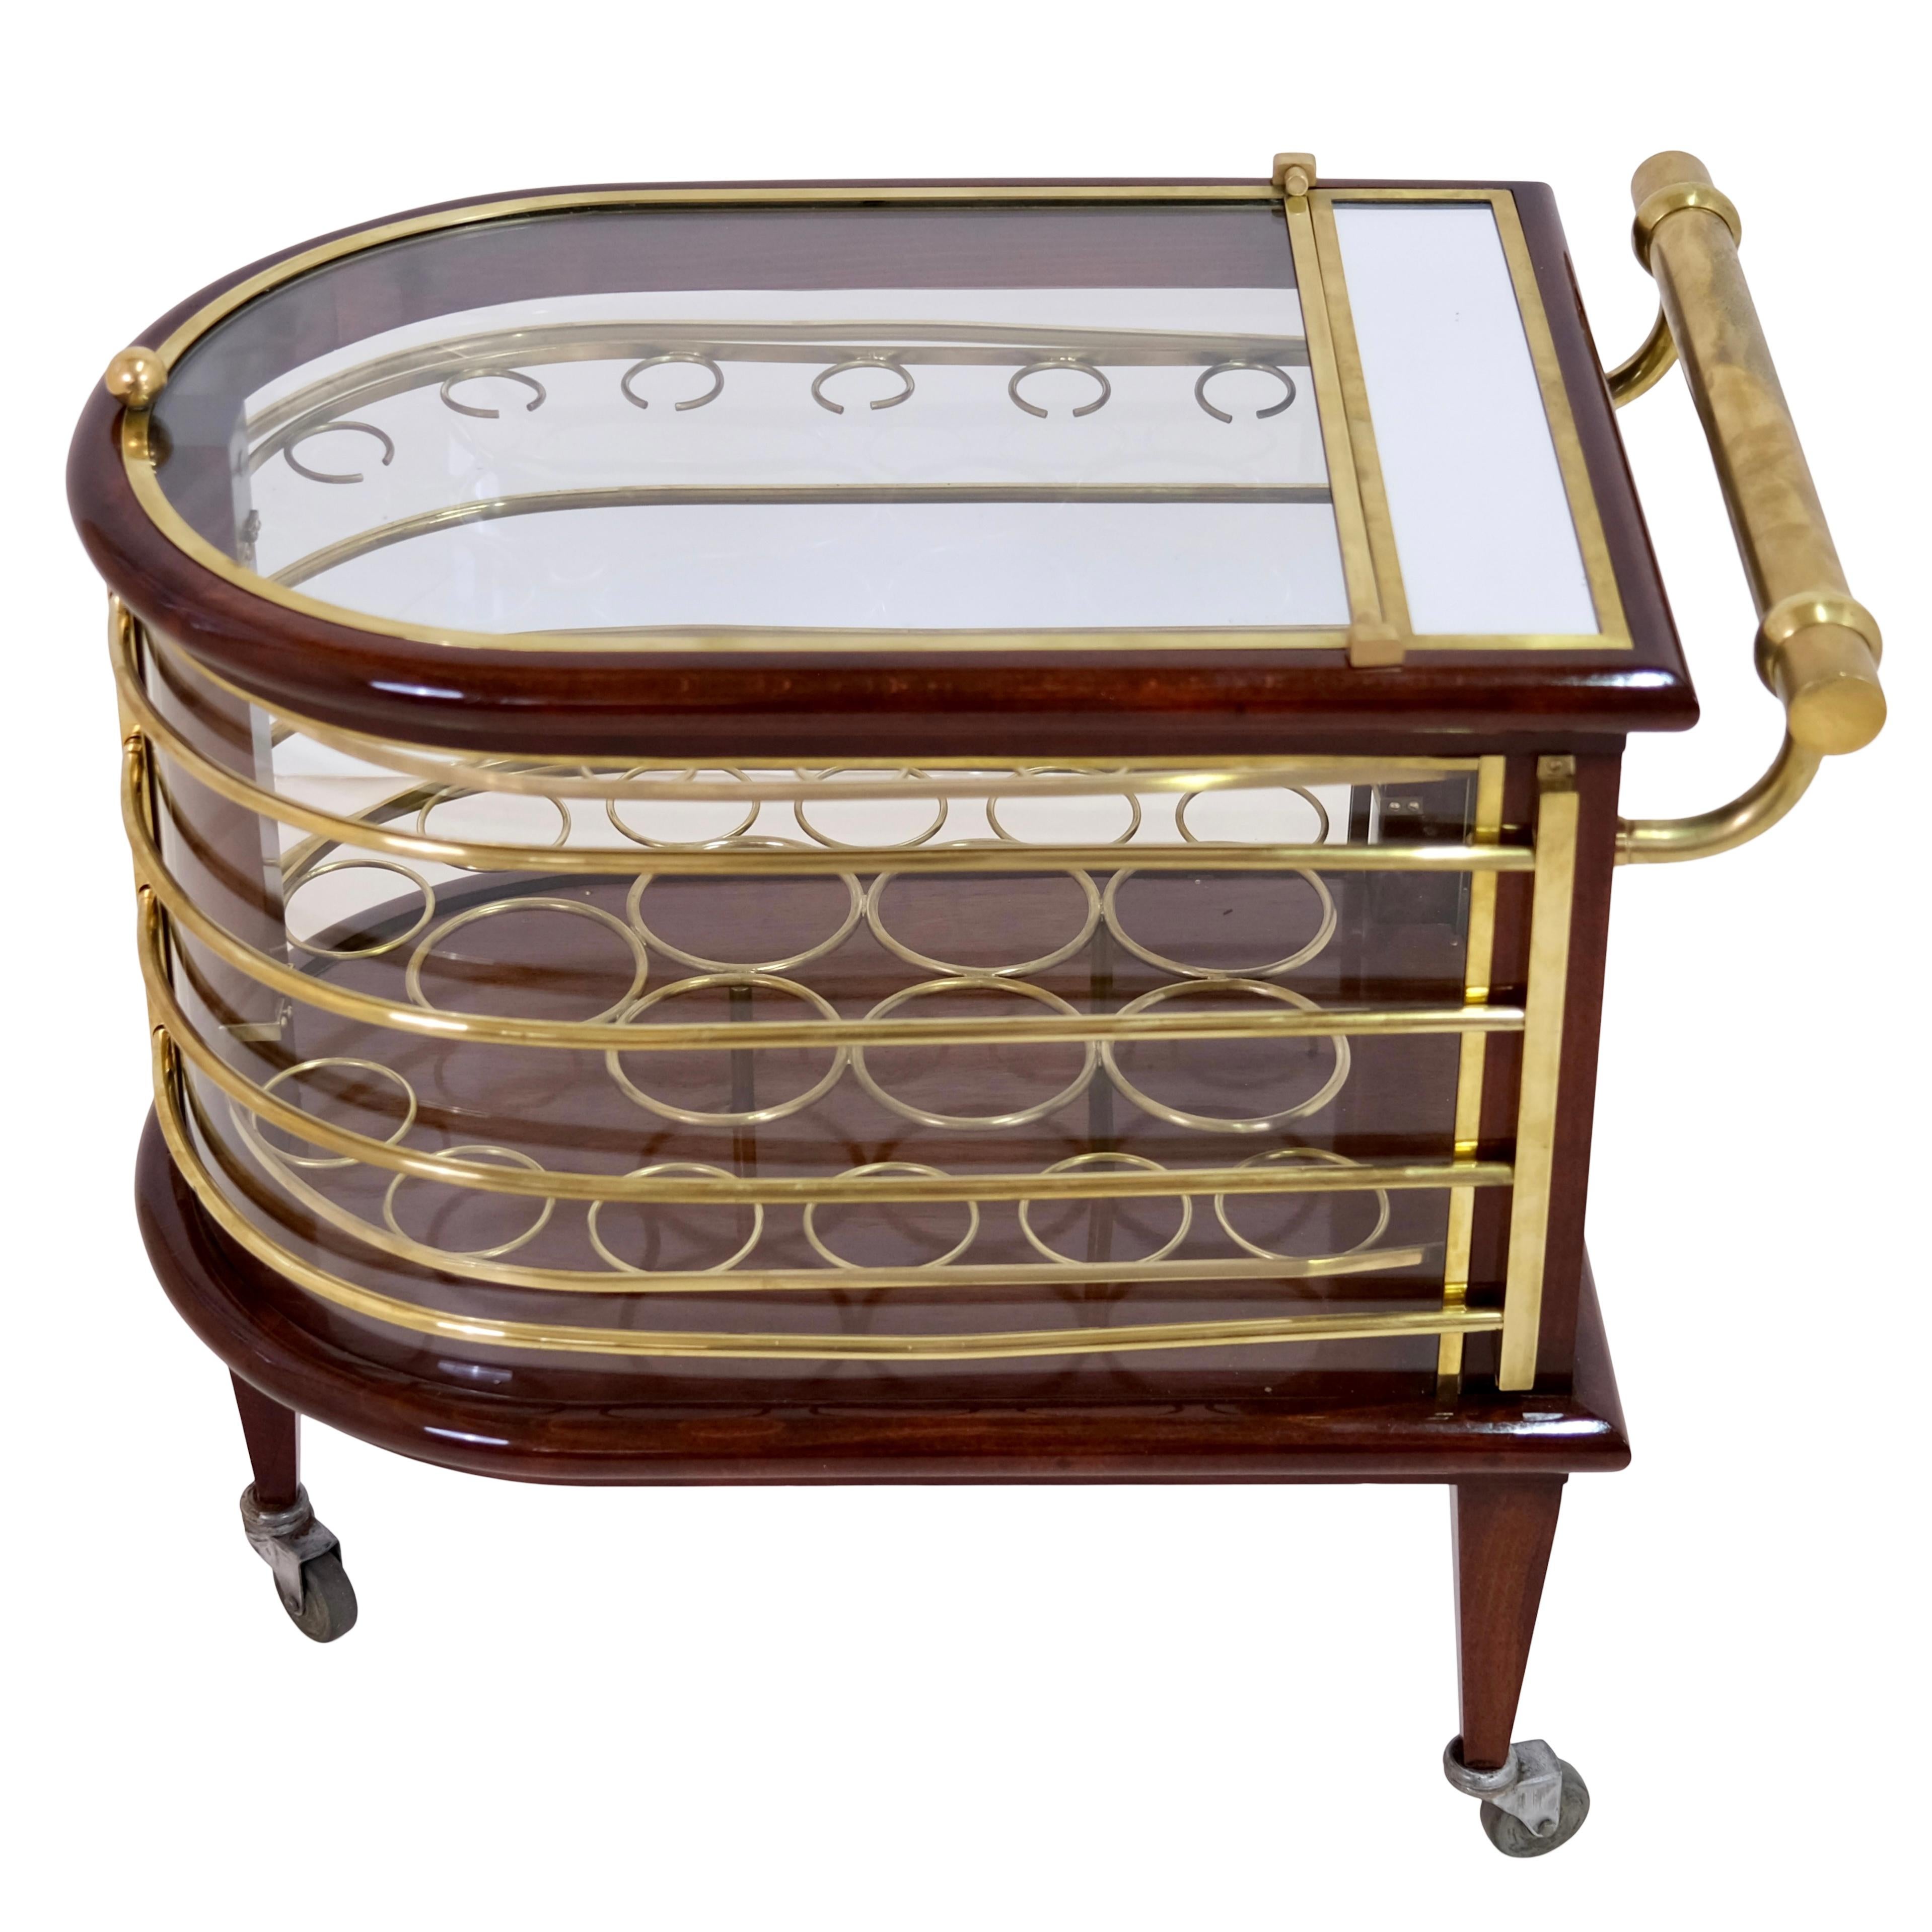 Polished Exceptional 1920s French Art Deco Bar Cart in Wood and Brass with Vitrine Case